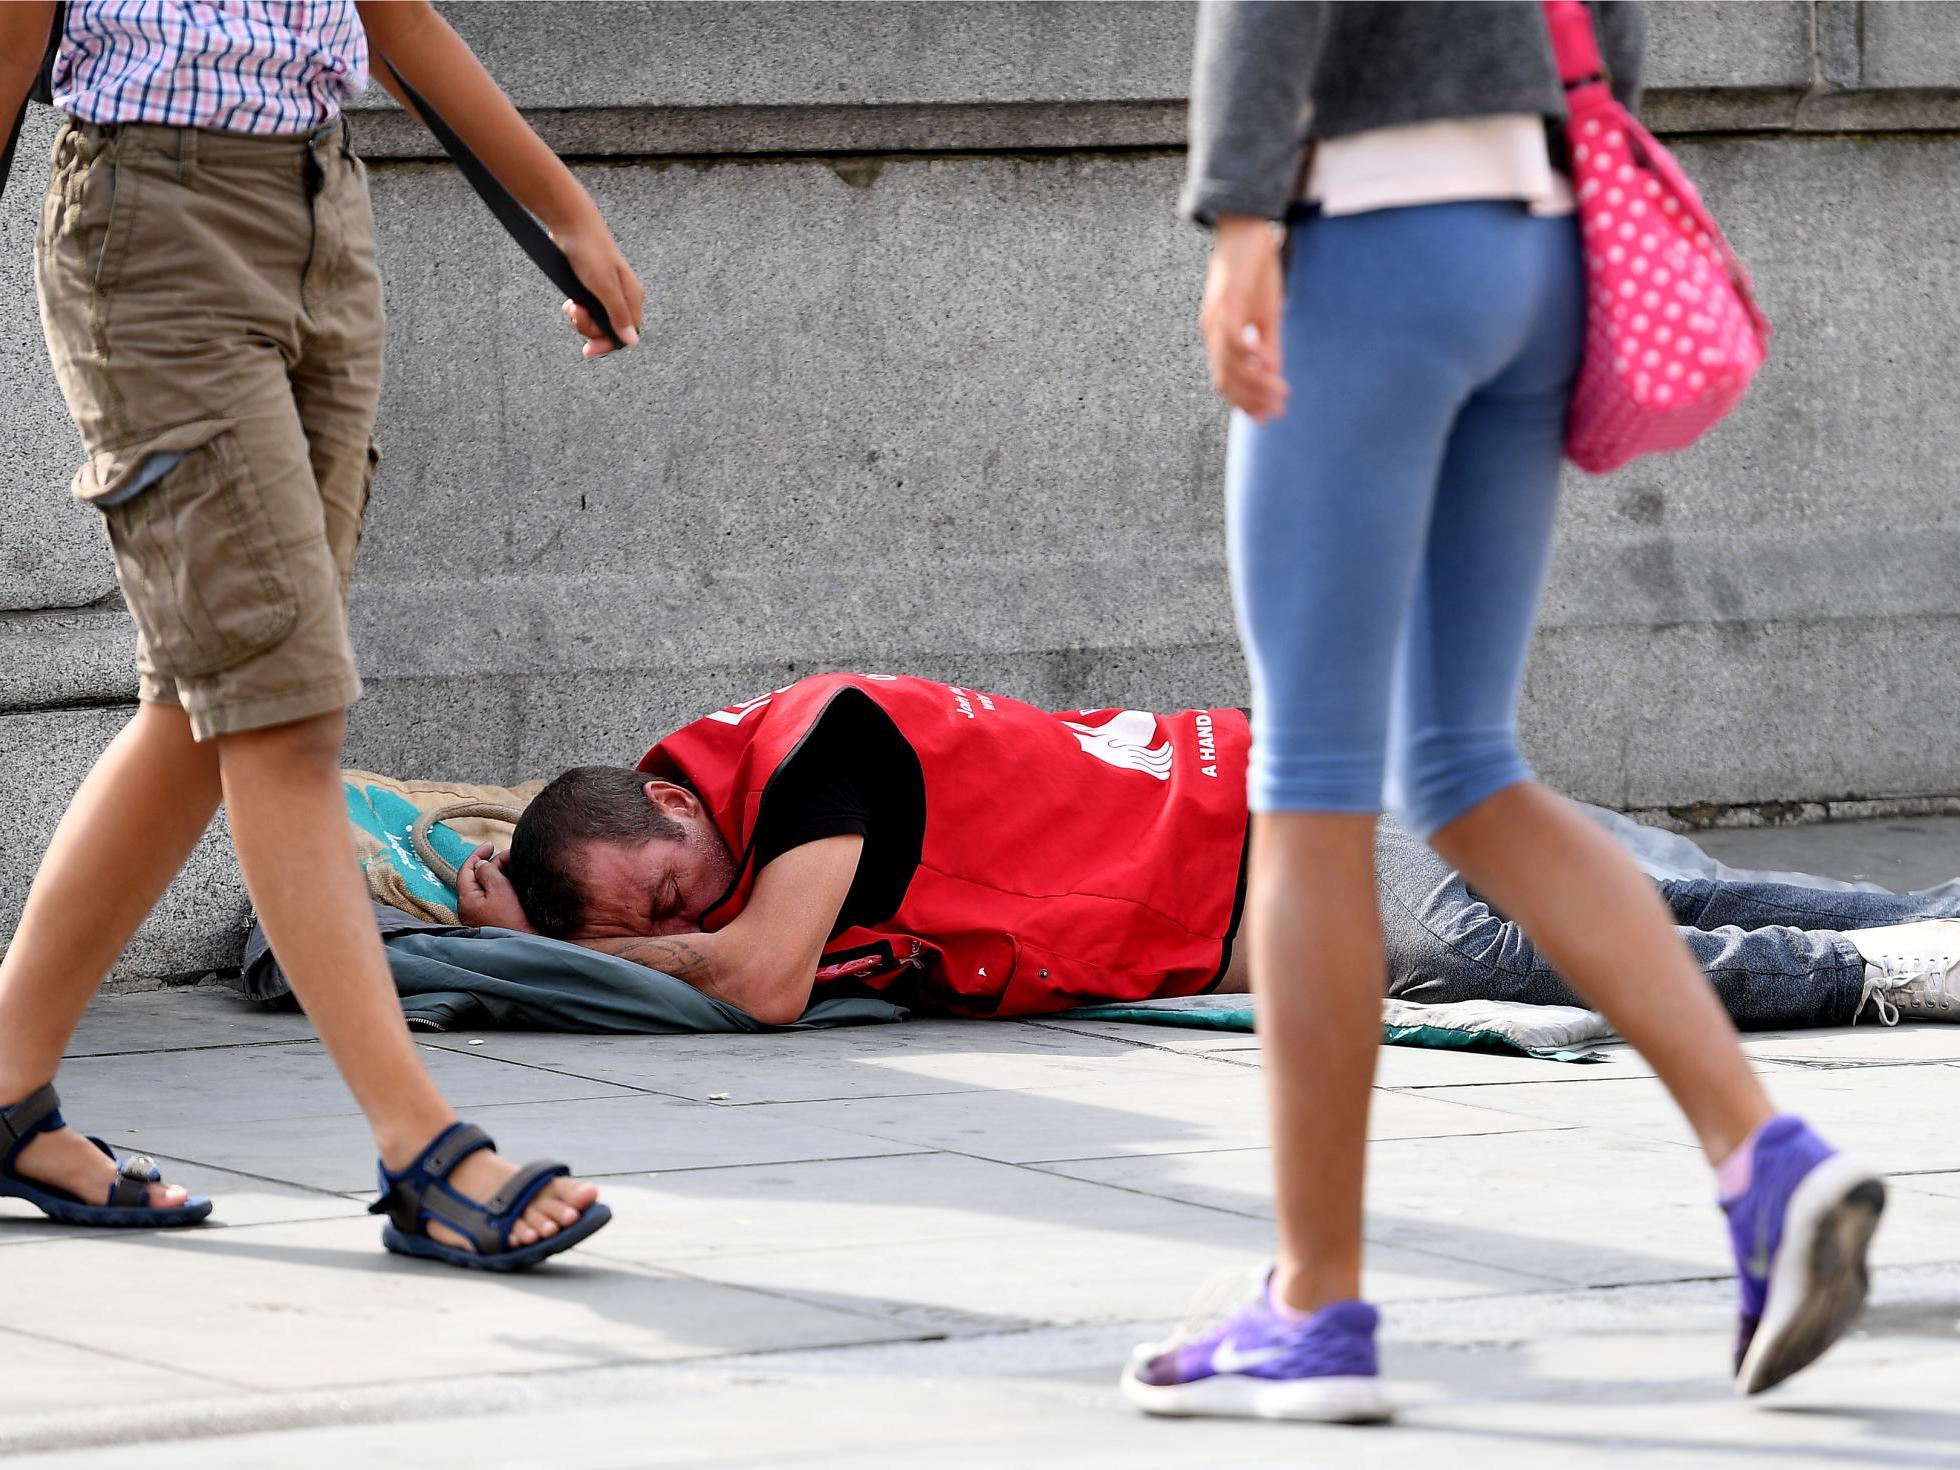 Campaigners say services for single homeless people have dropped by £1bn per year